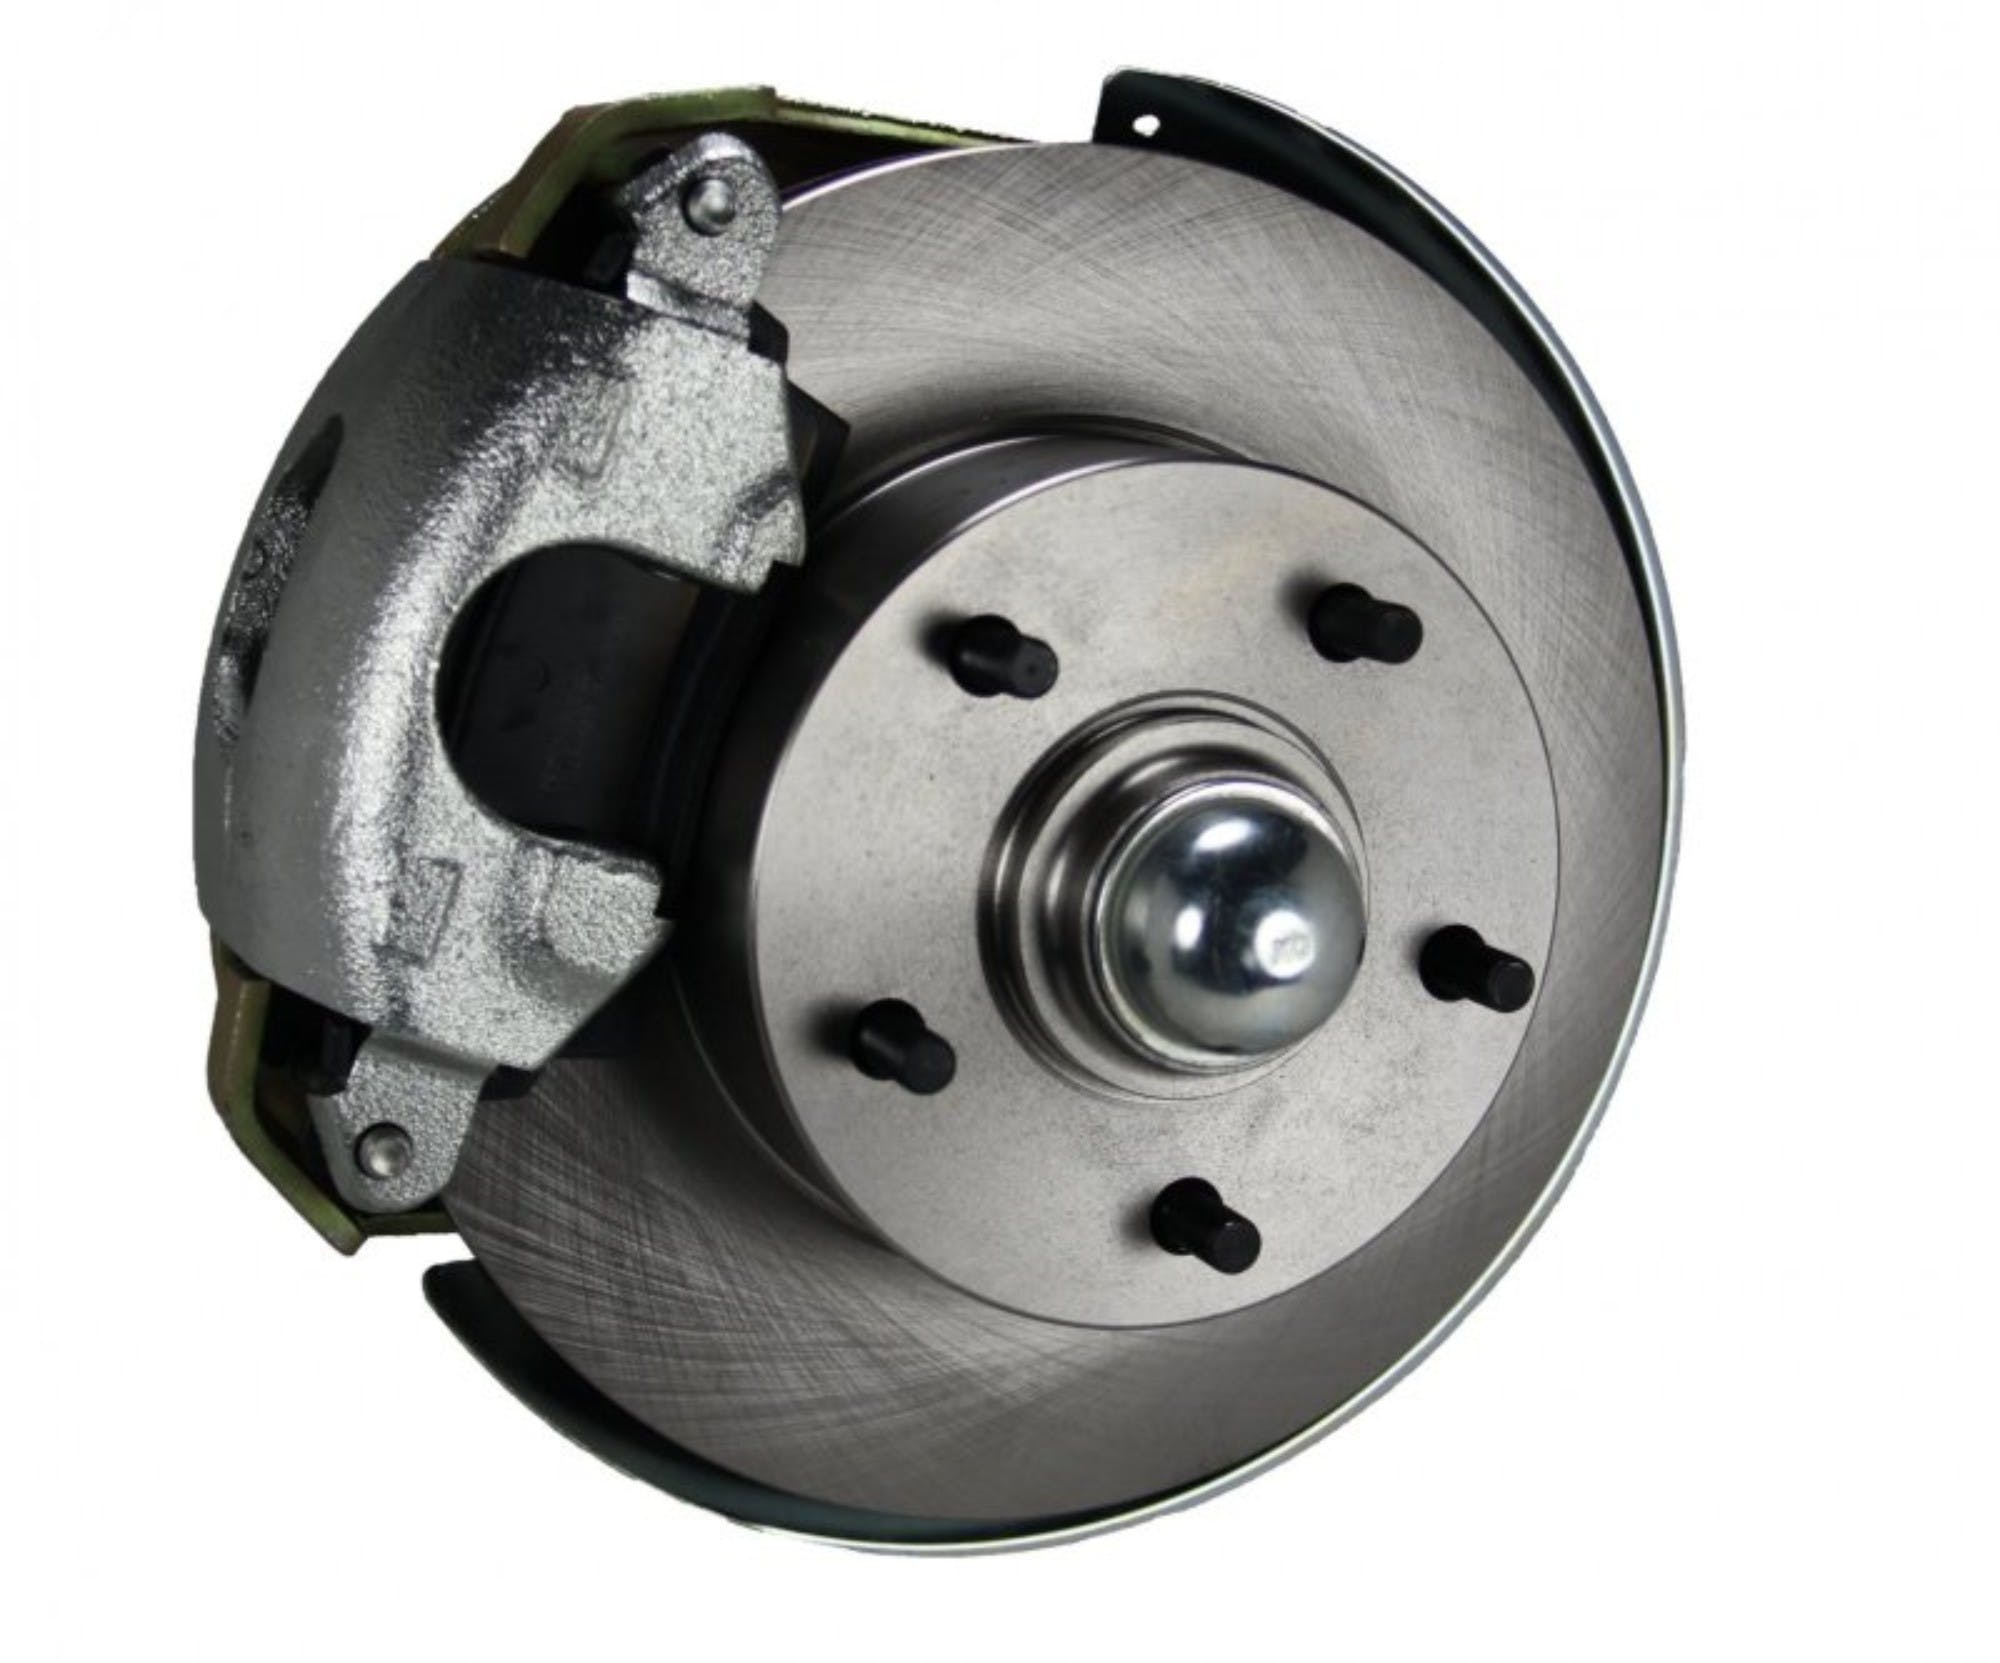 LEED Brakes FC1002-E1A3 Power Front Disc Kit - 9 in - Disc Disc - Zinc